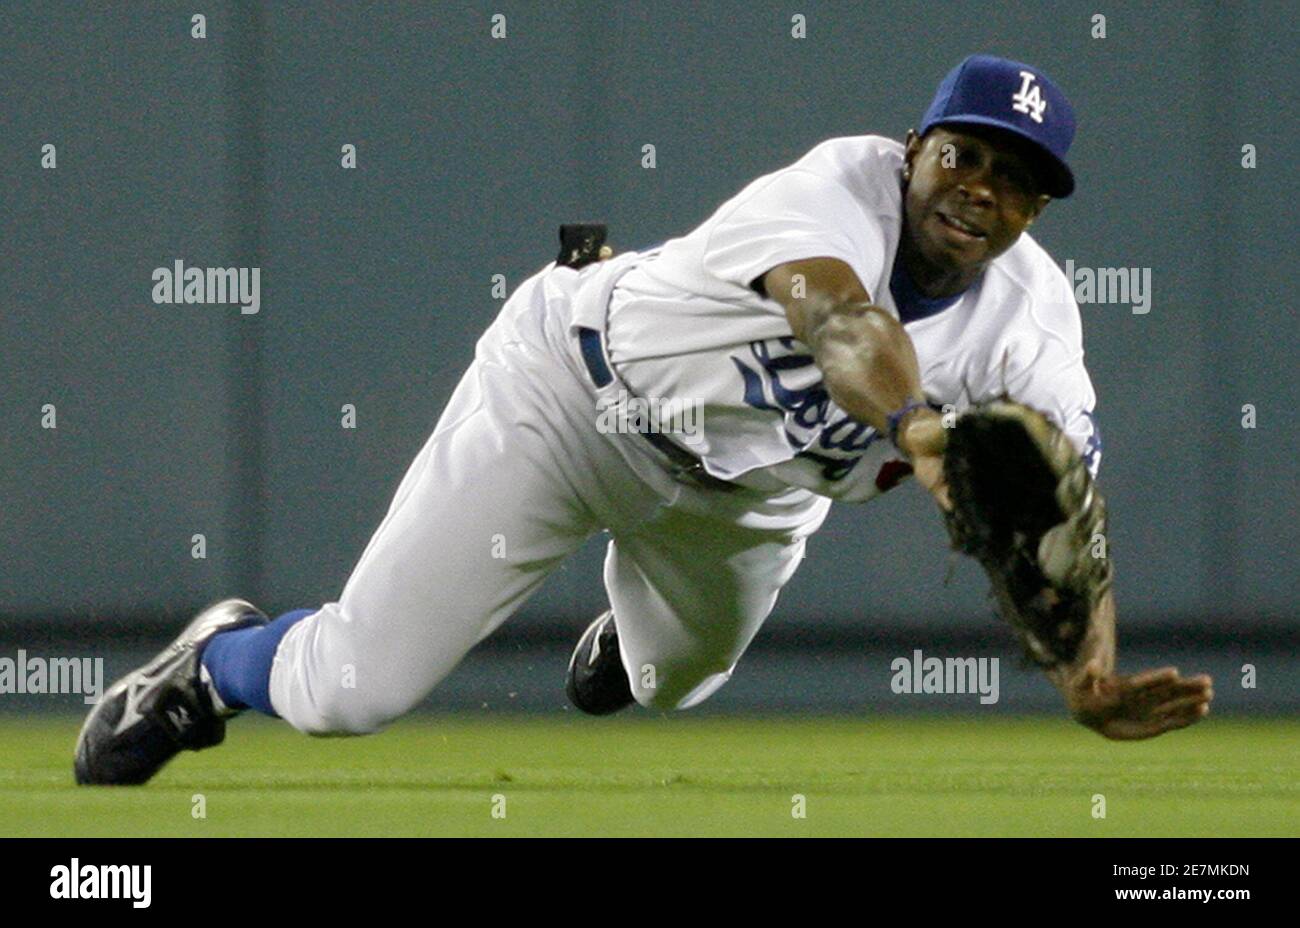 Los Angeles Dodgers center fielder Juan Pierre dives and catches a ball hit  by Colorado Rockies Matt Holliday during the first inning of an MLB  National League baseball game in Los Angeles,